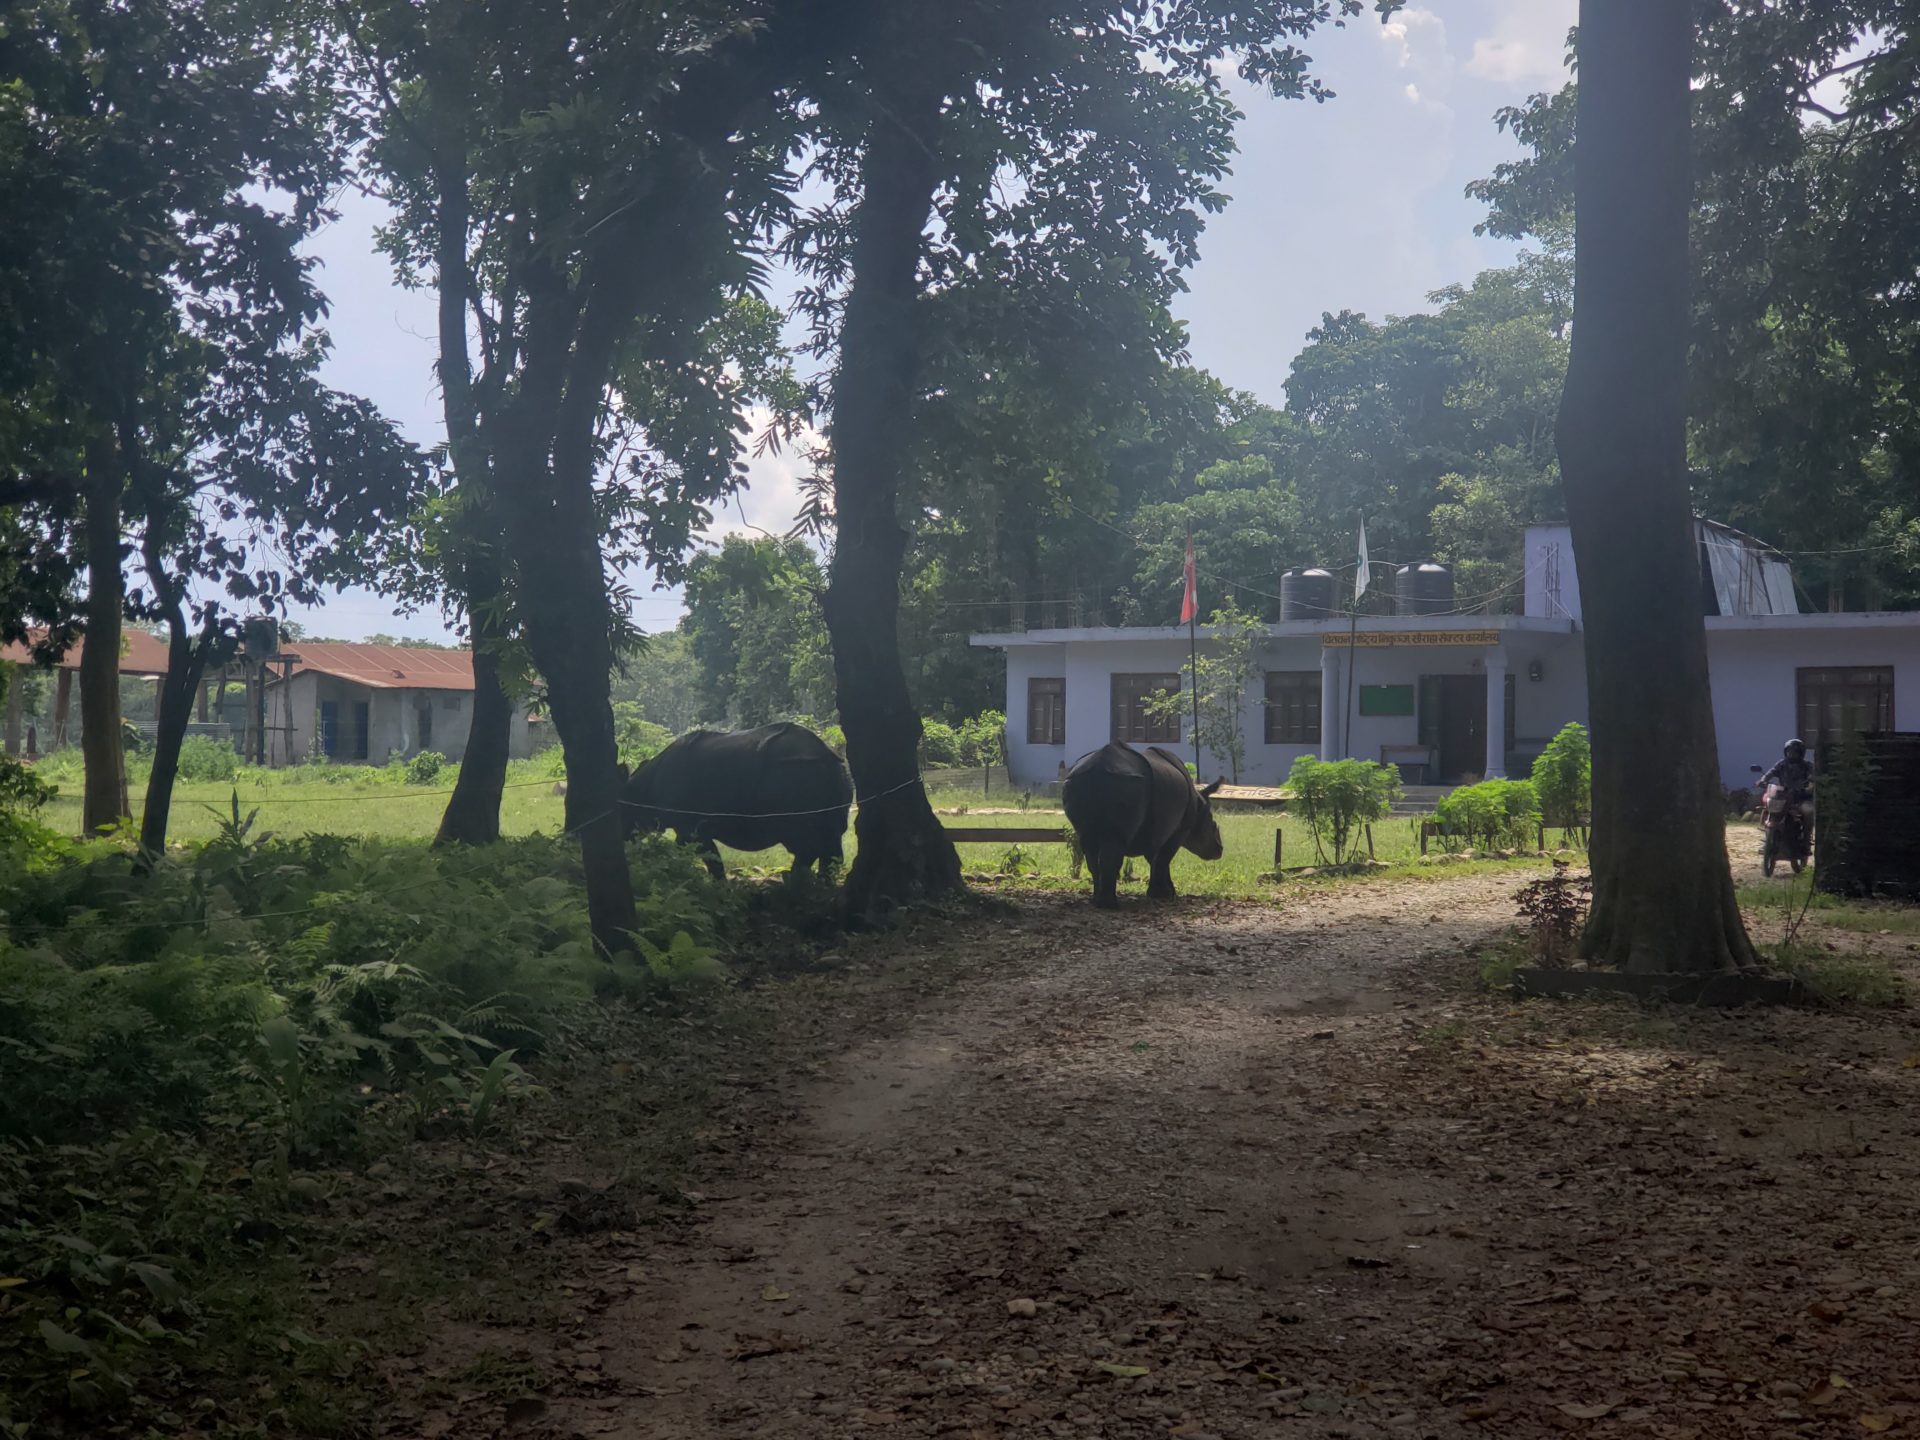 two rhinos walking on a dirt road in front of a building